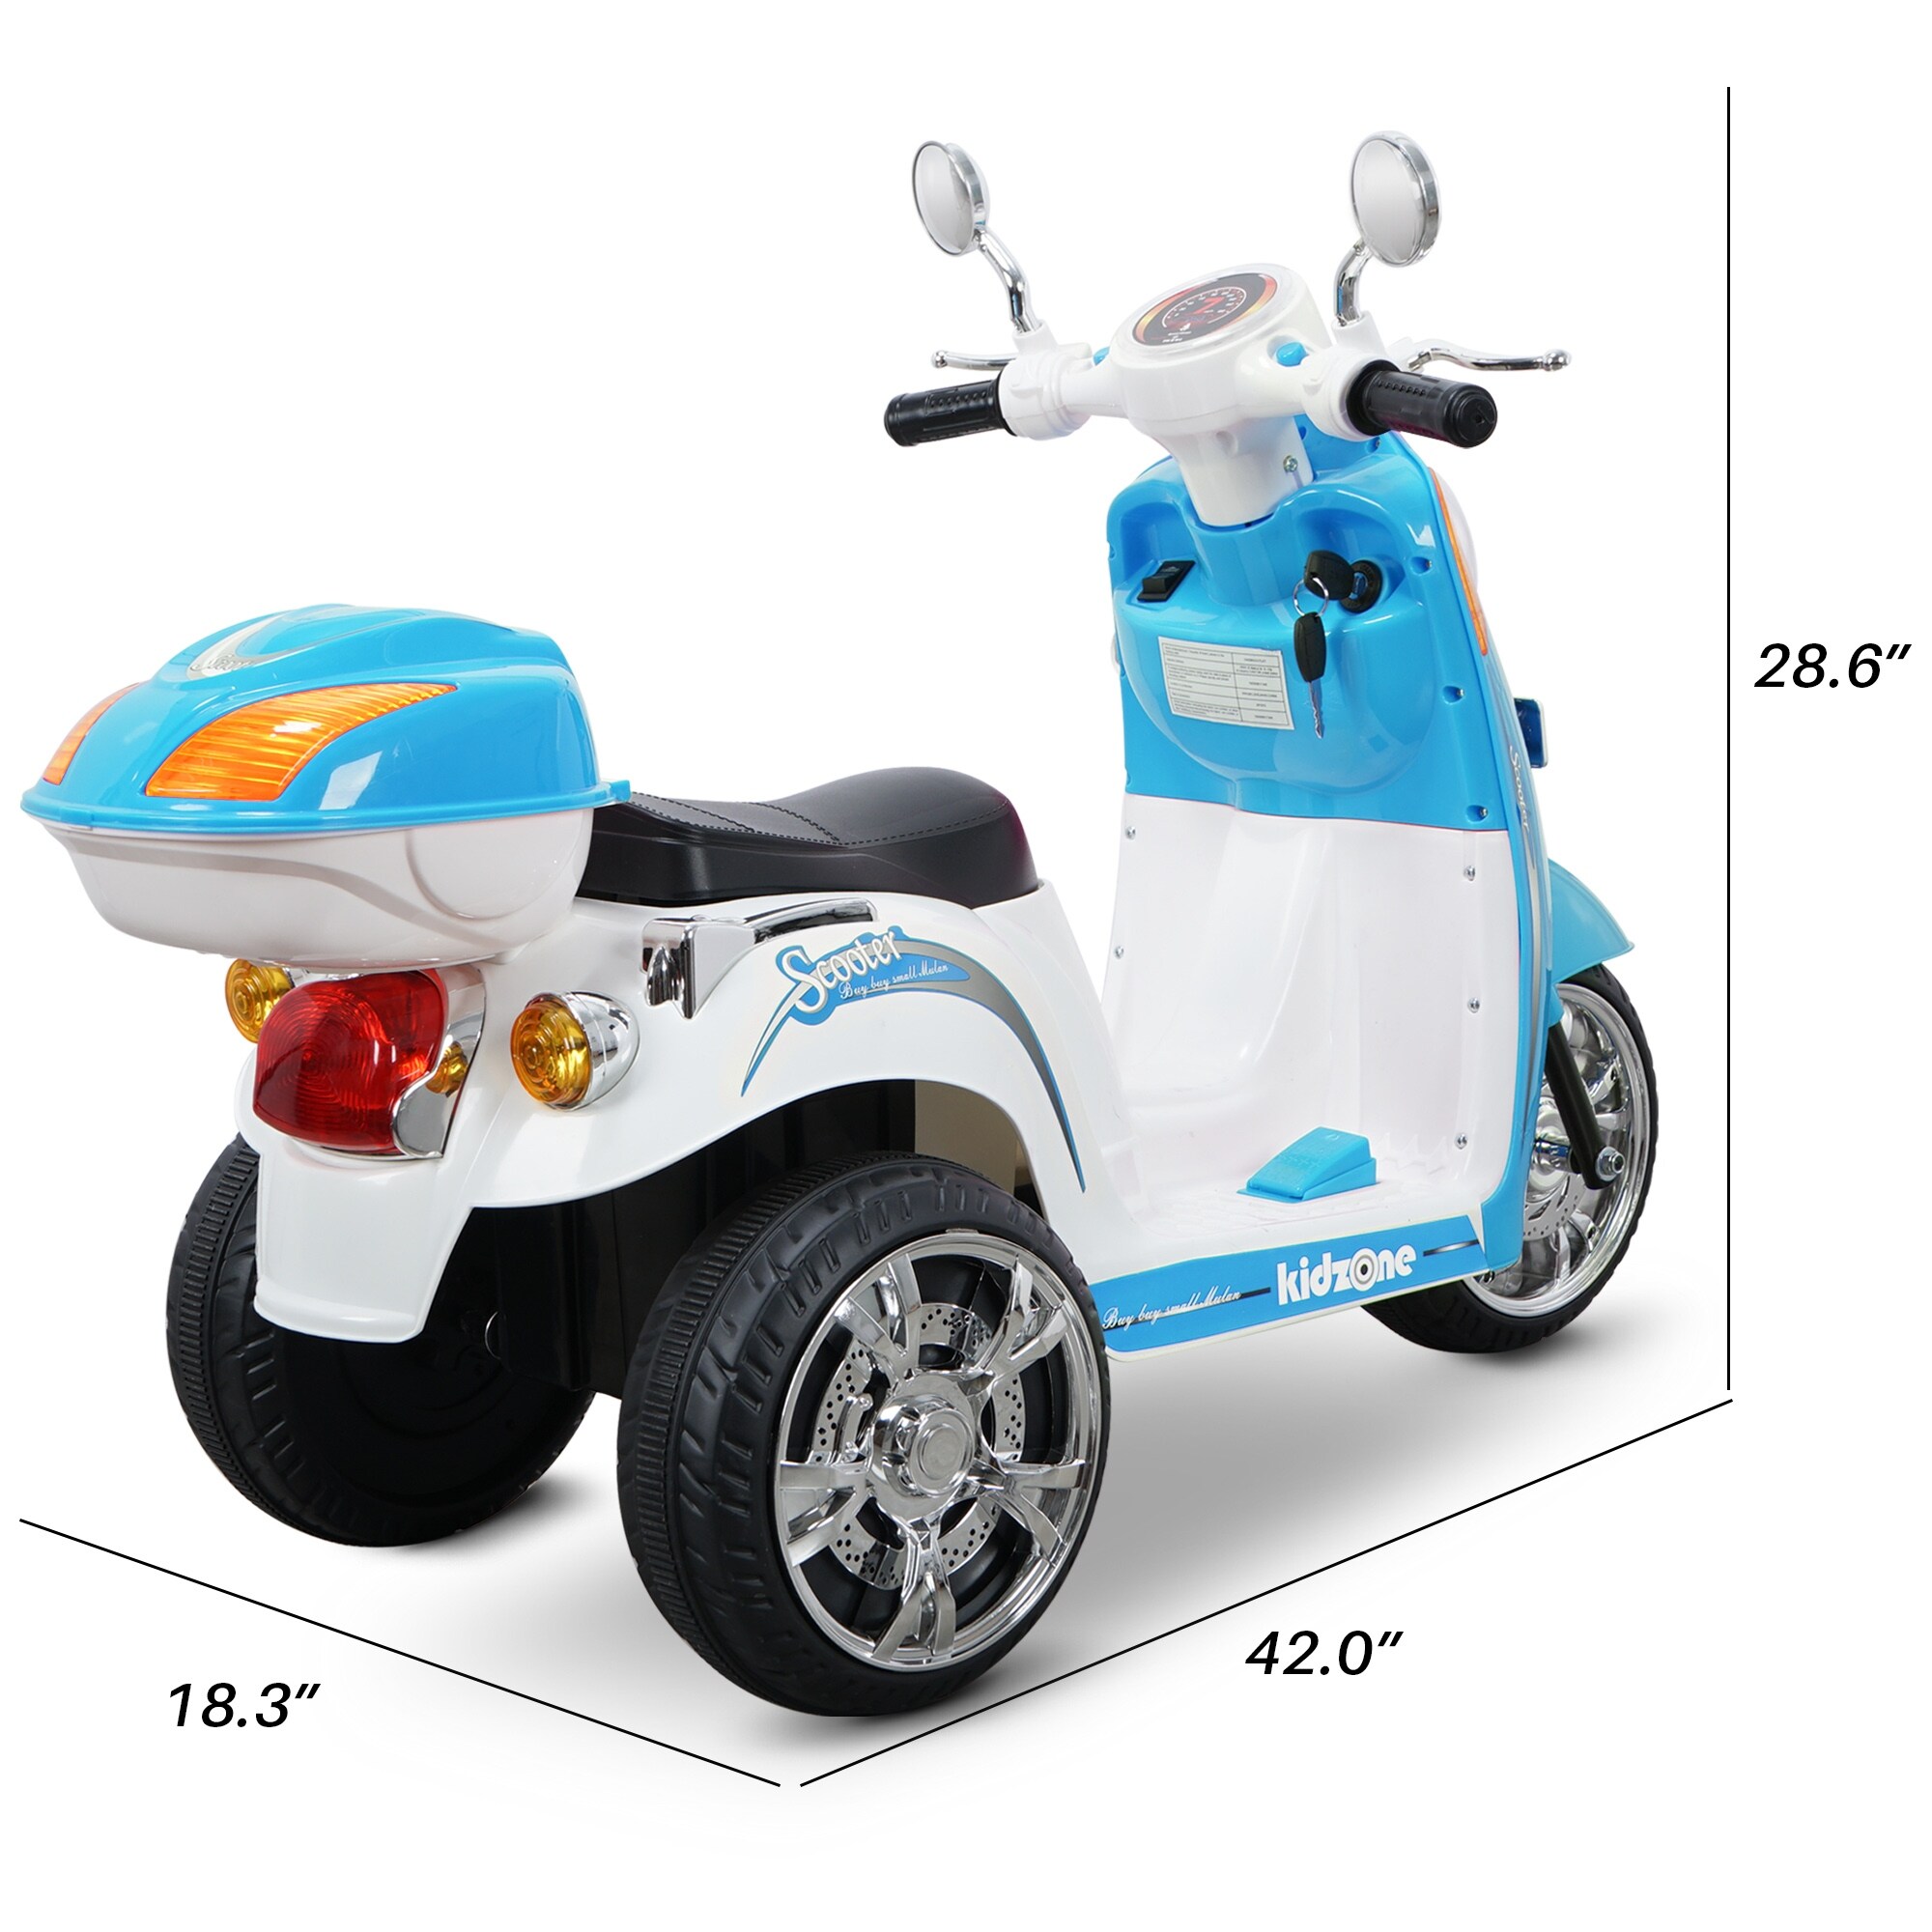 small toy scooter